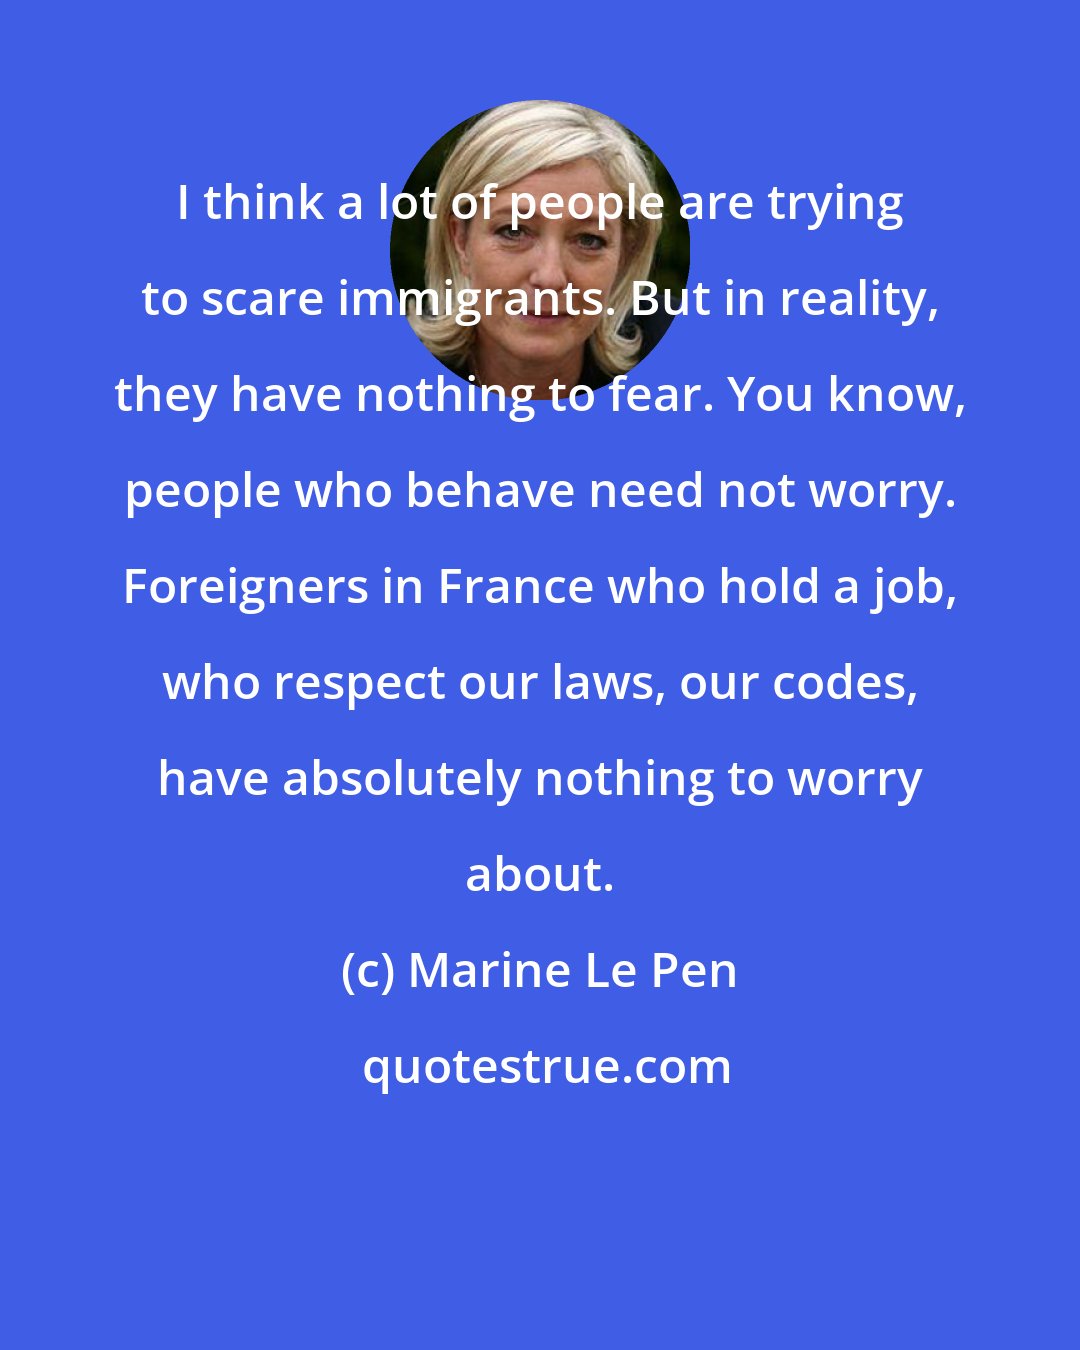 Marine Le Pen: I think a lot of people are trying to scare immigrants. But in reality, they have nothing to fear. You know, people who behave need not worry. Foreigners in France who hold a job, who respect our laws, our codes, have absolutely nothing to worry about.